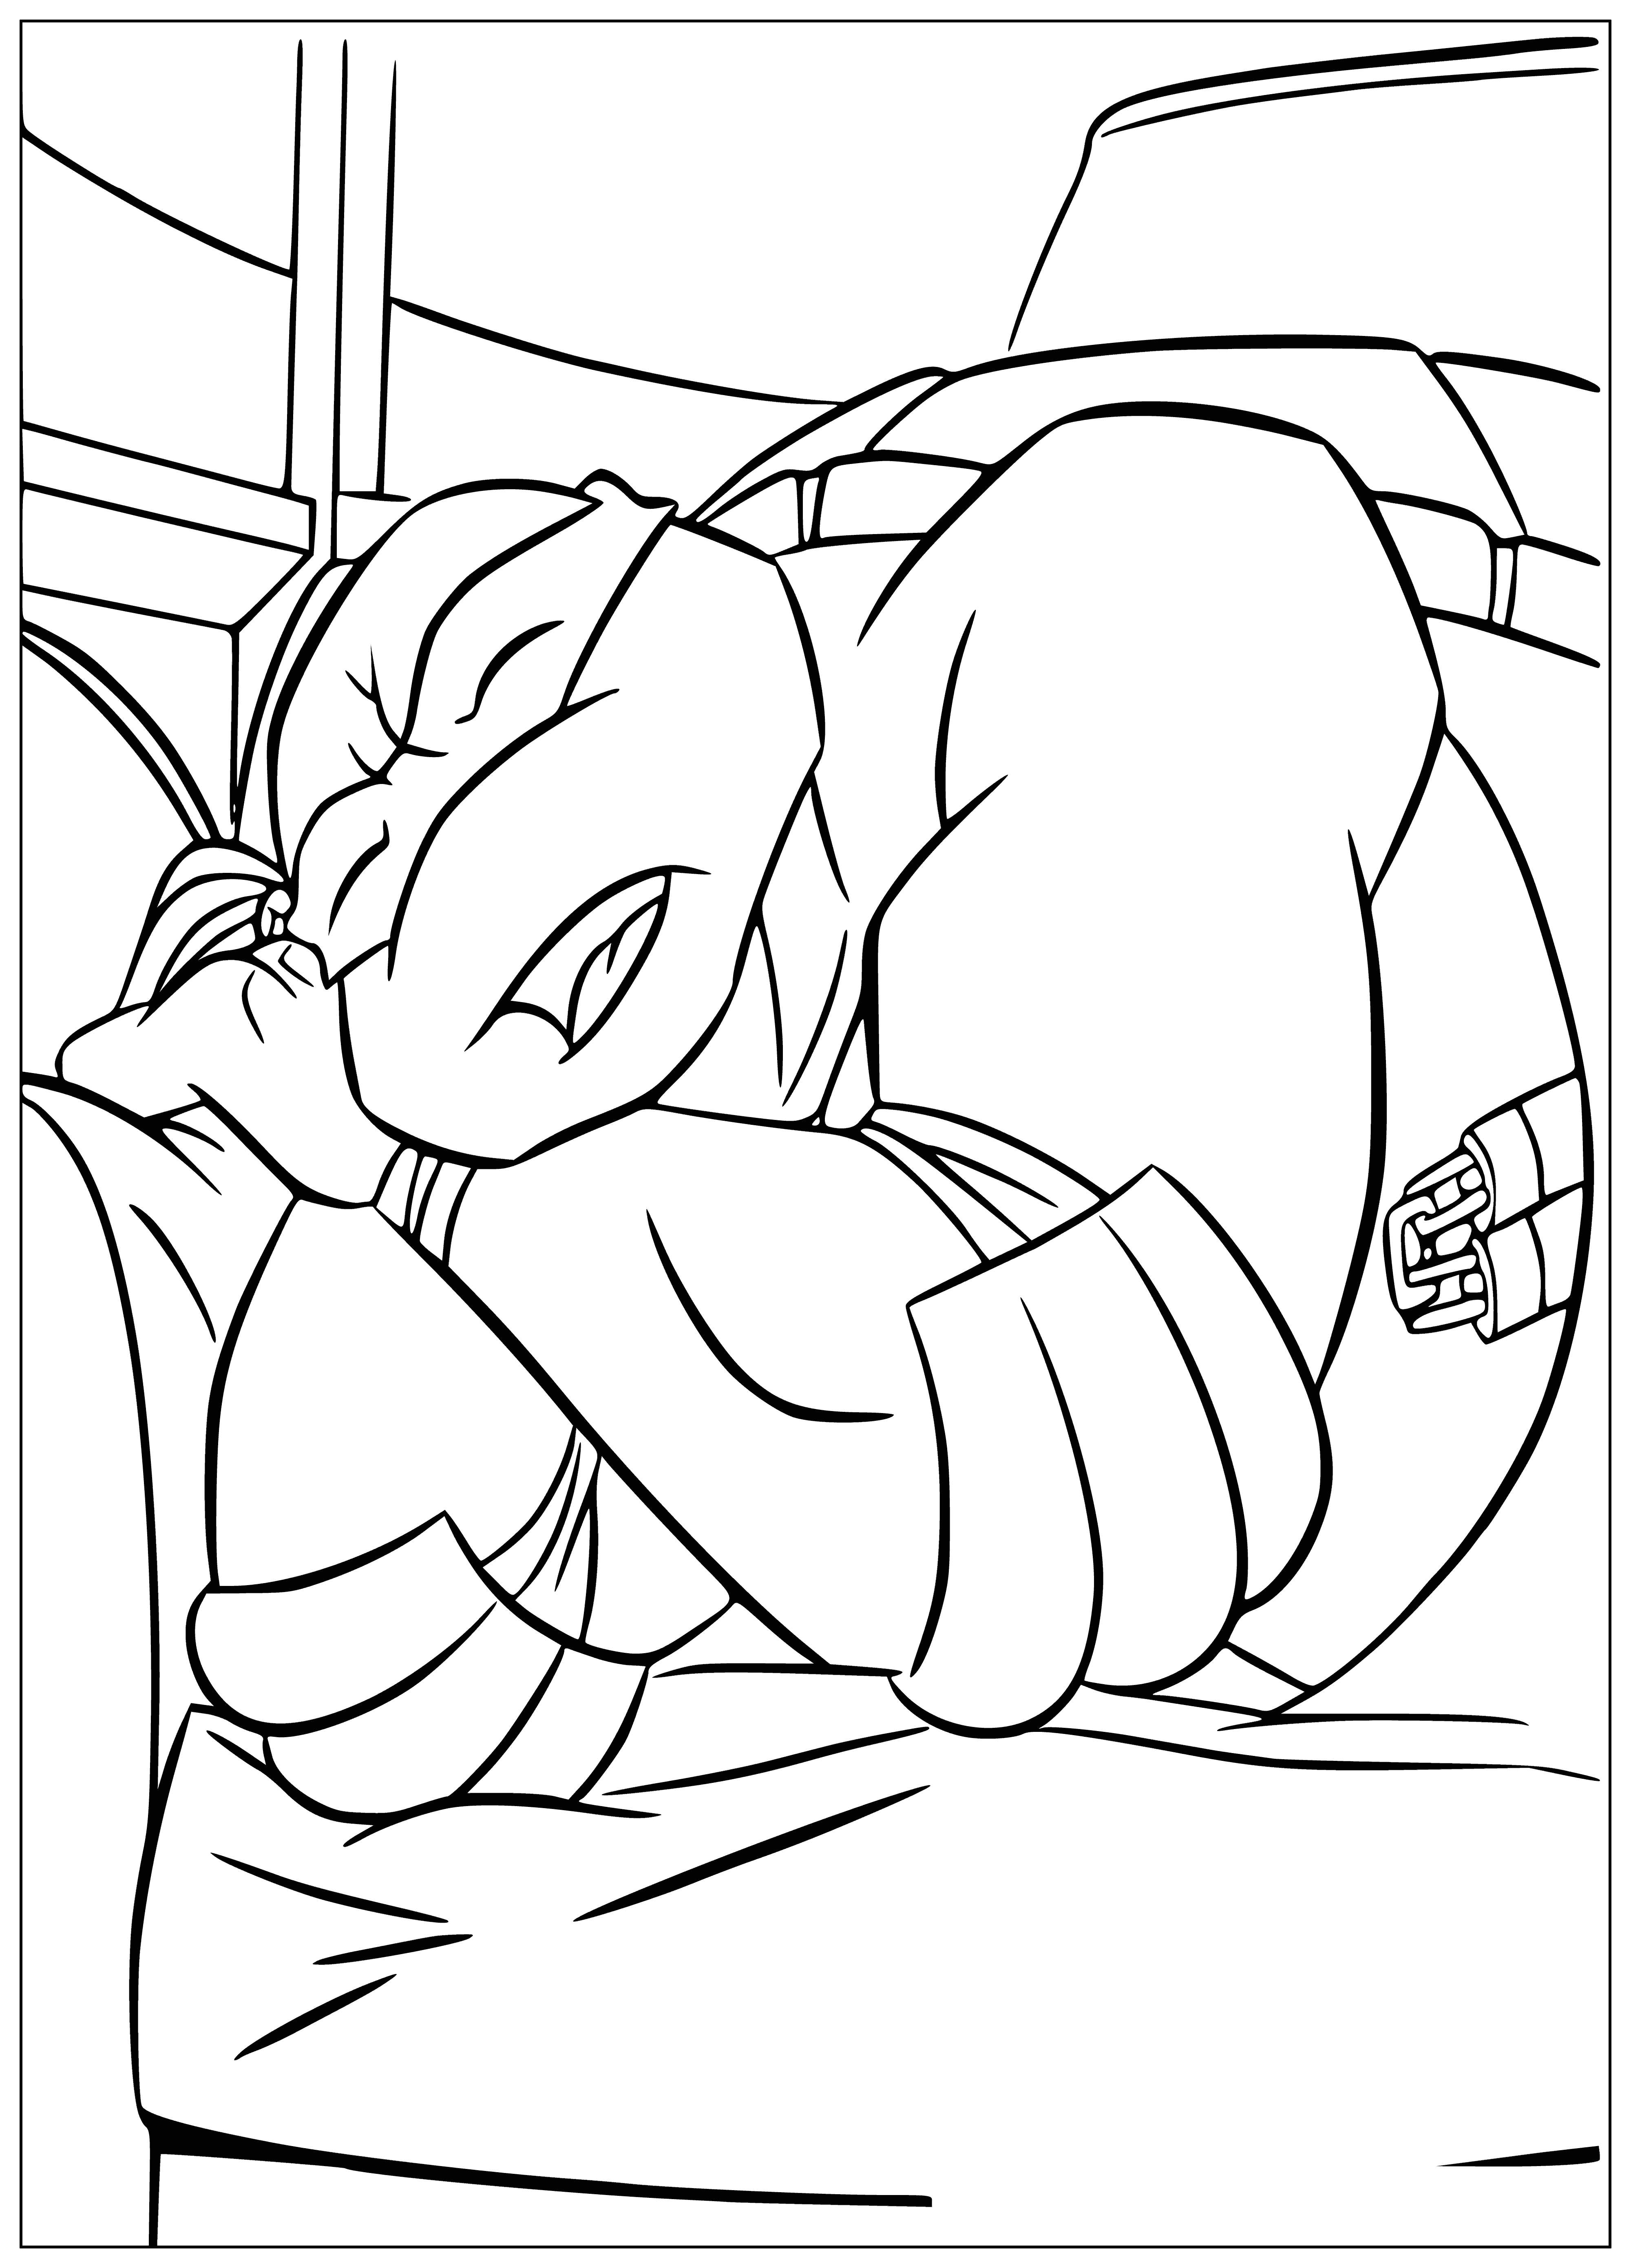 coloring page: Raphael sleeps peacefully on a green blanket, head resting on folded arms, smiling serenely.